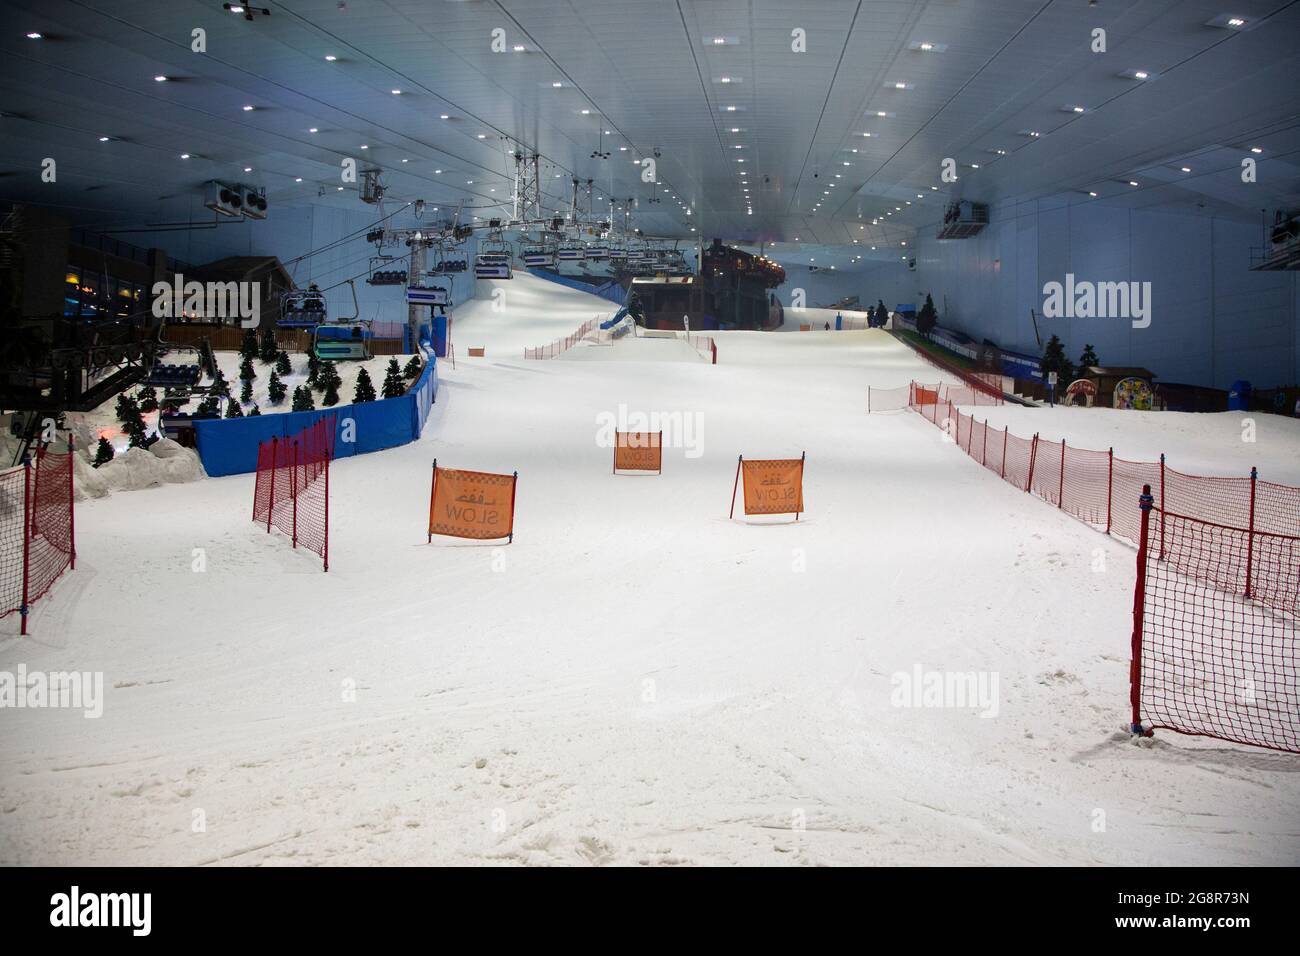 Ski Dubai is an indoor ski resort with 22,500 square meters of indoor ski area. The park maintains a temperature of -1 degree to 2 degrees Celsius thr Stock Photo